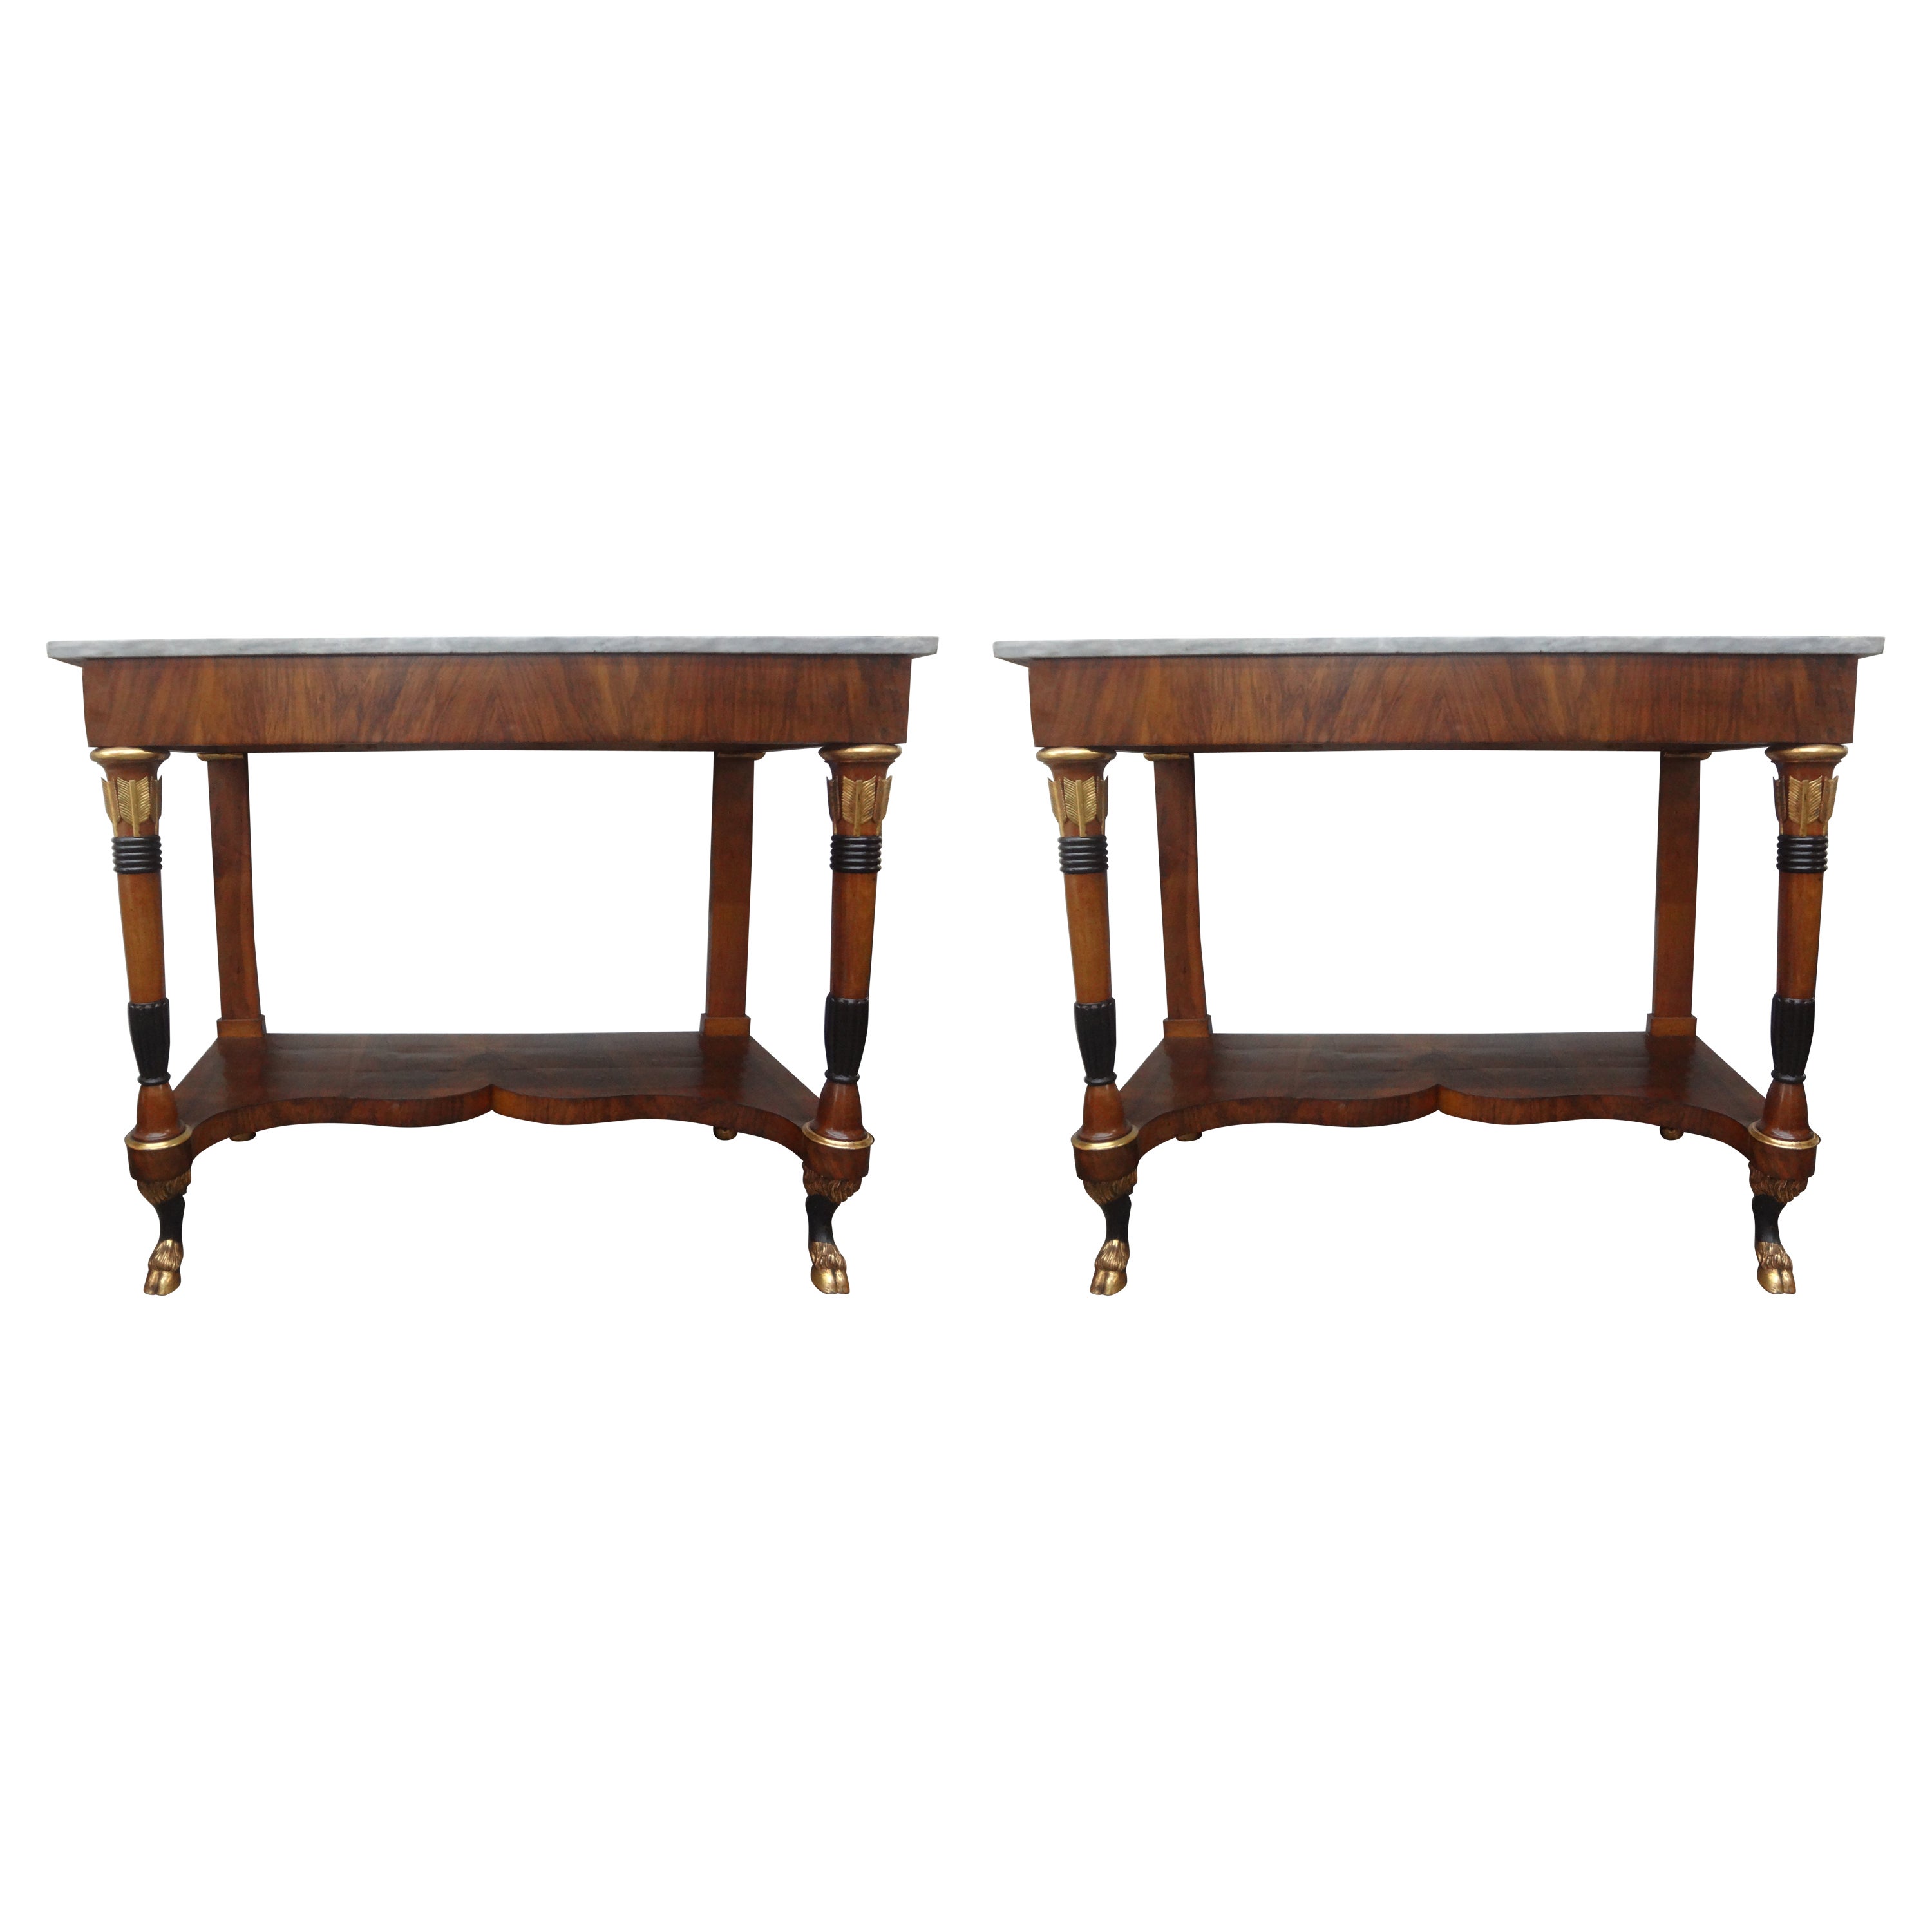 Outstanding Pair of 19th Century Italian Empire Console Tables For Sale